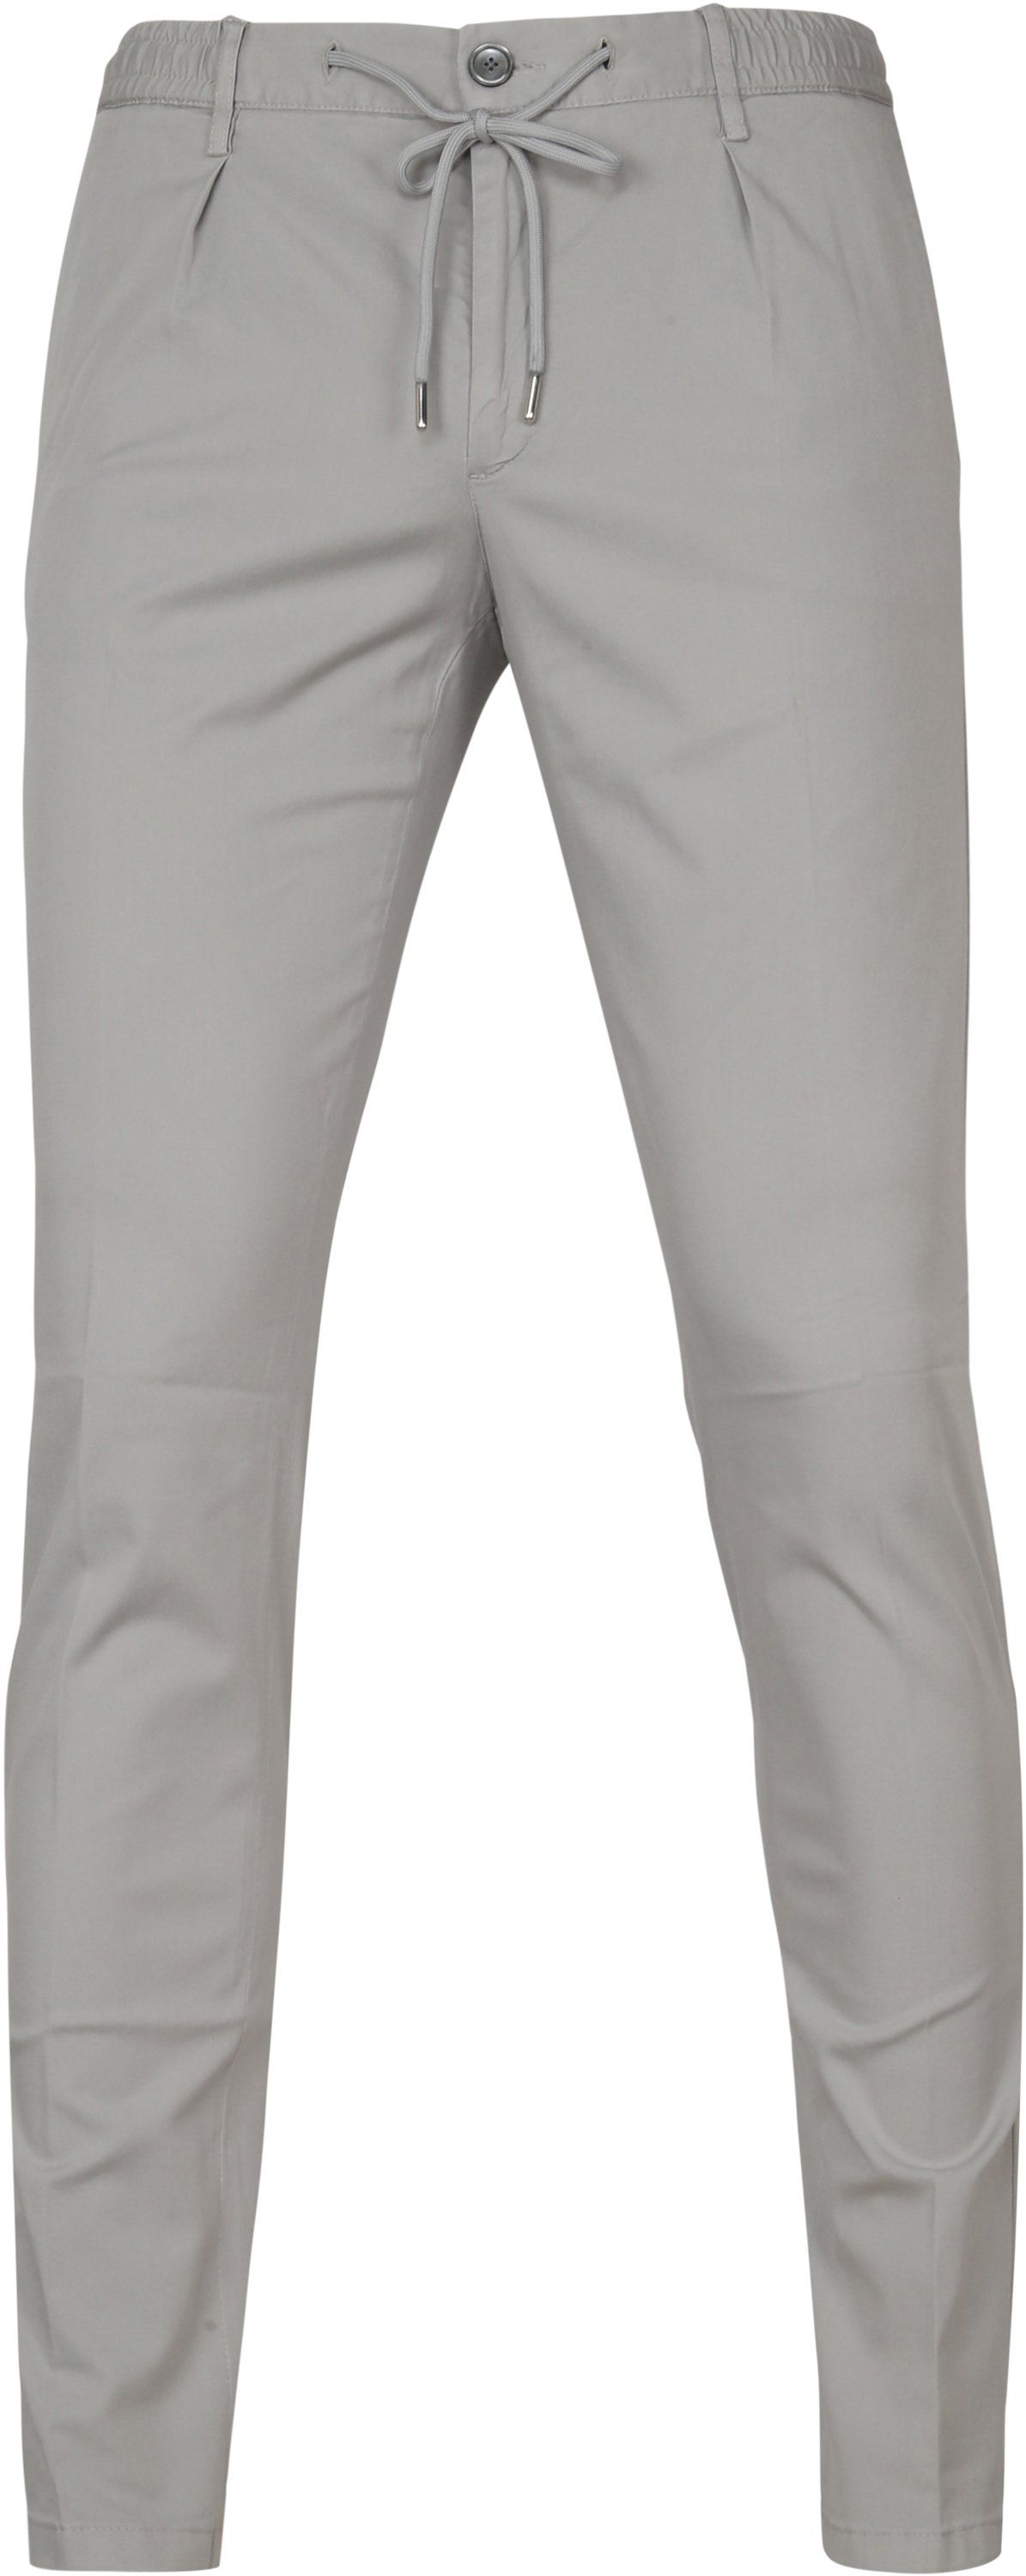 Profuomo Chino Beige Gris taille 48